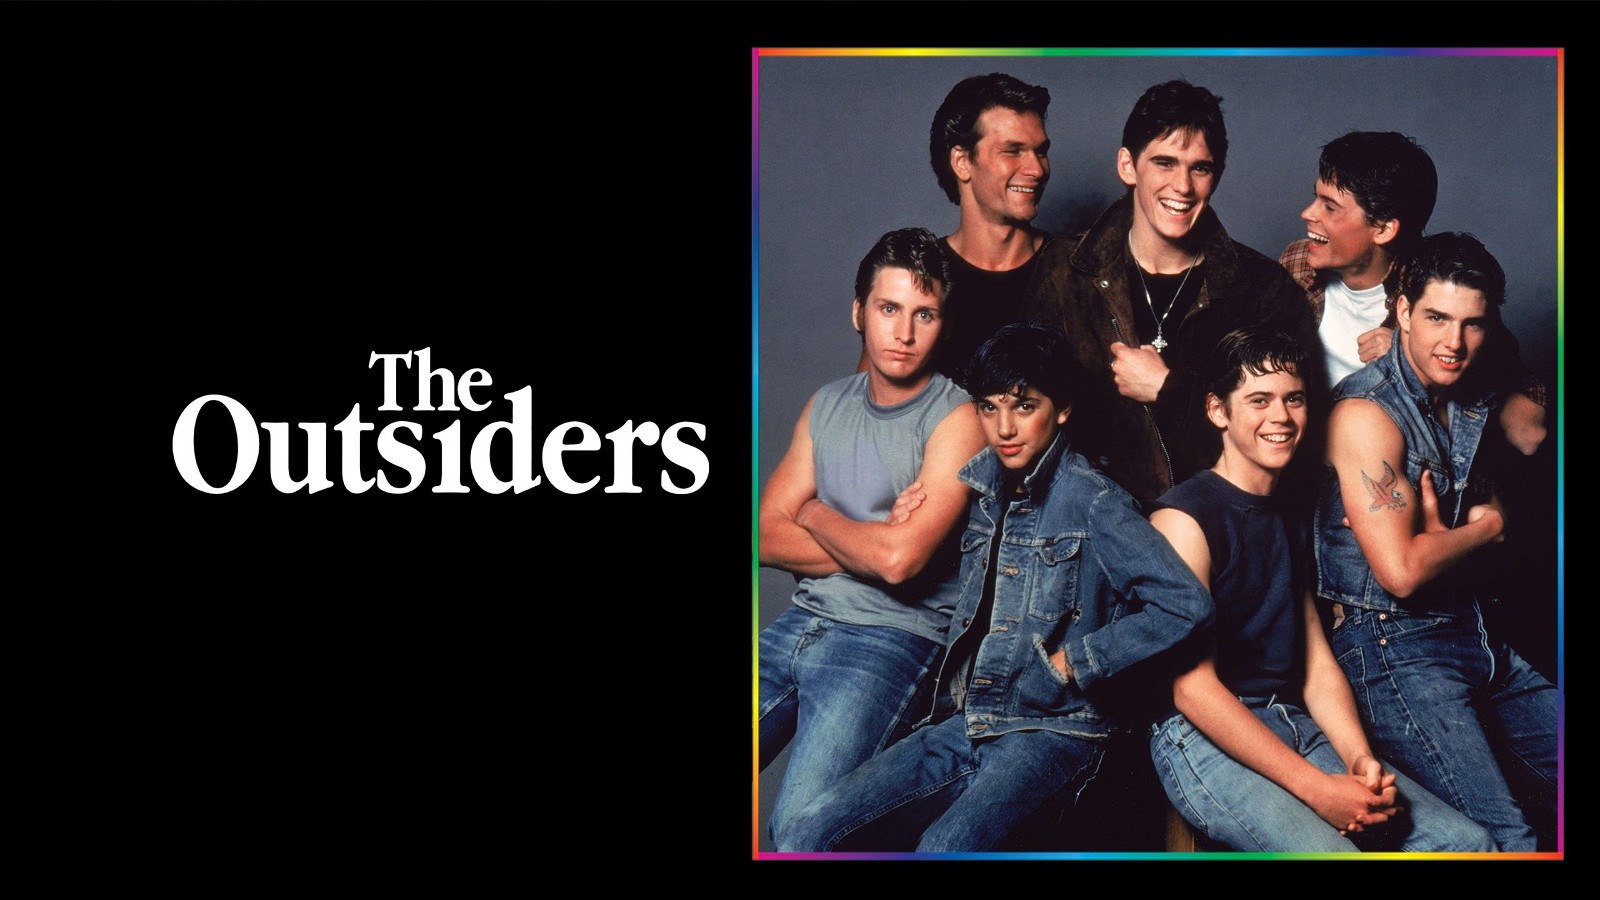 Francis Ford Coppola's The Outsiders 